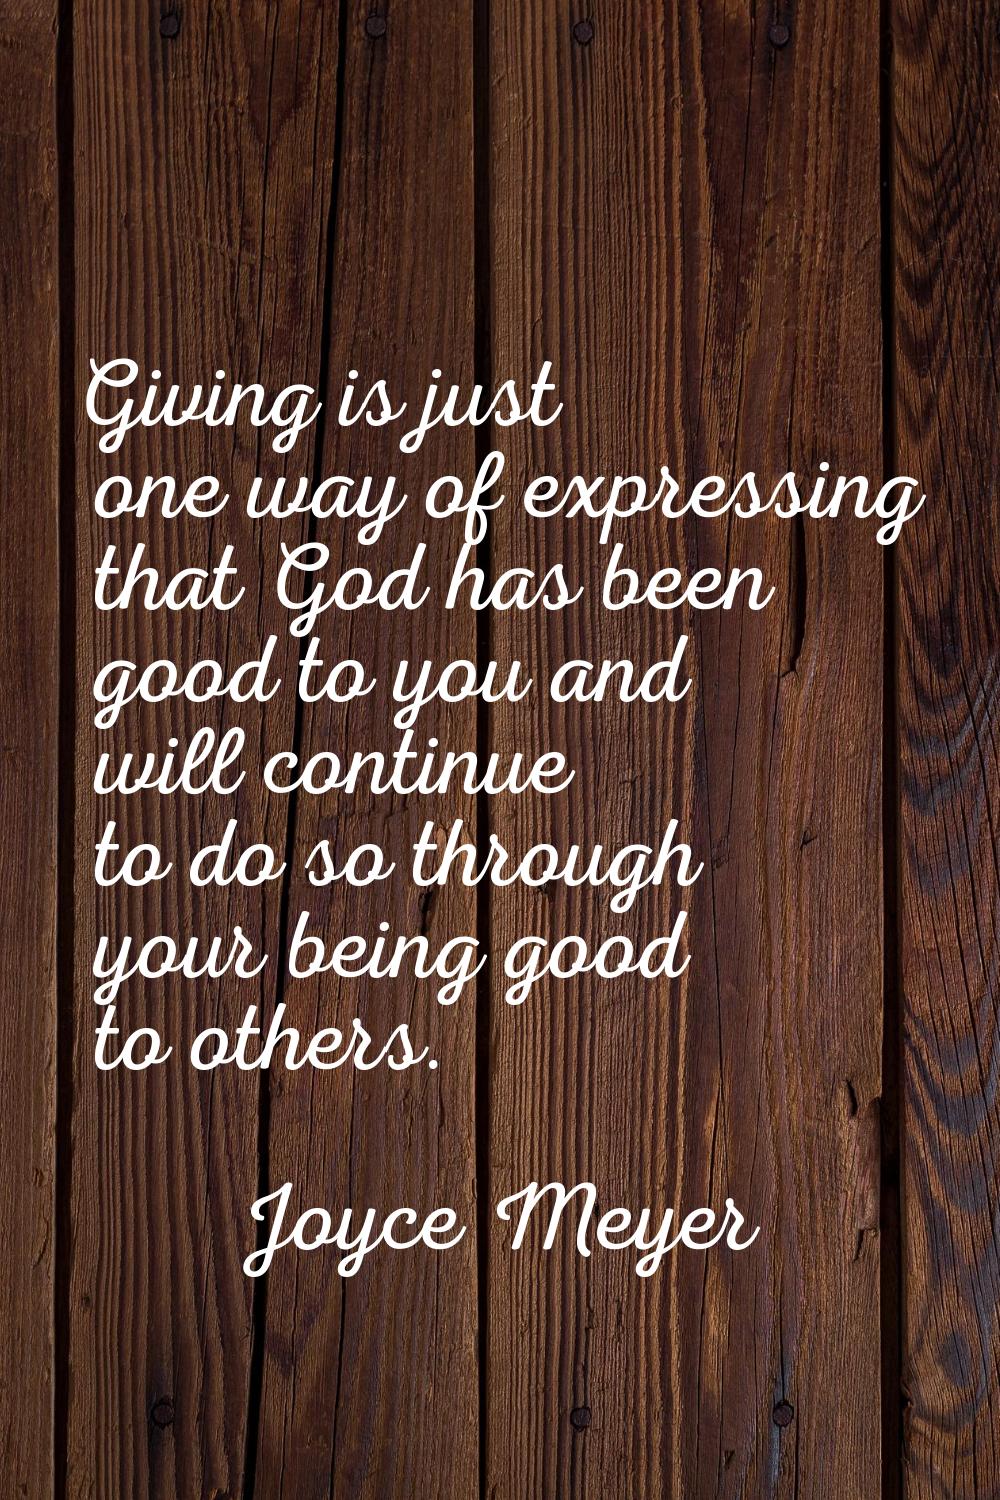 Giving is just one way of expressing that God has been good to you and will continue to do so throu